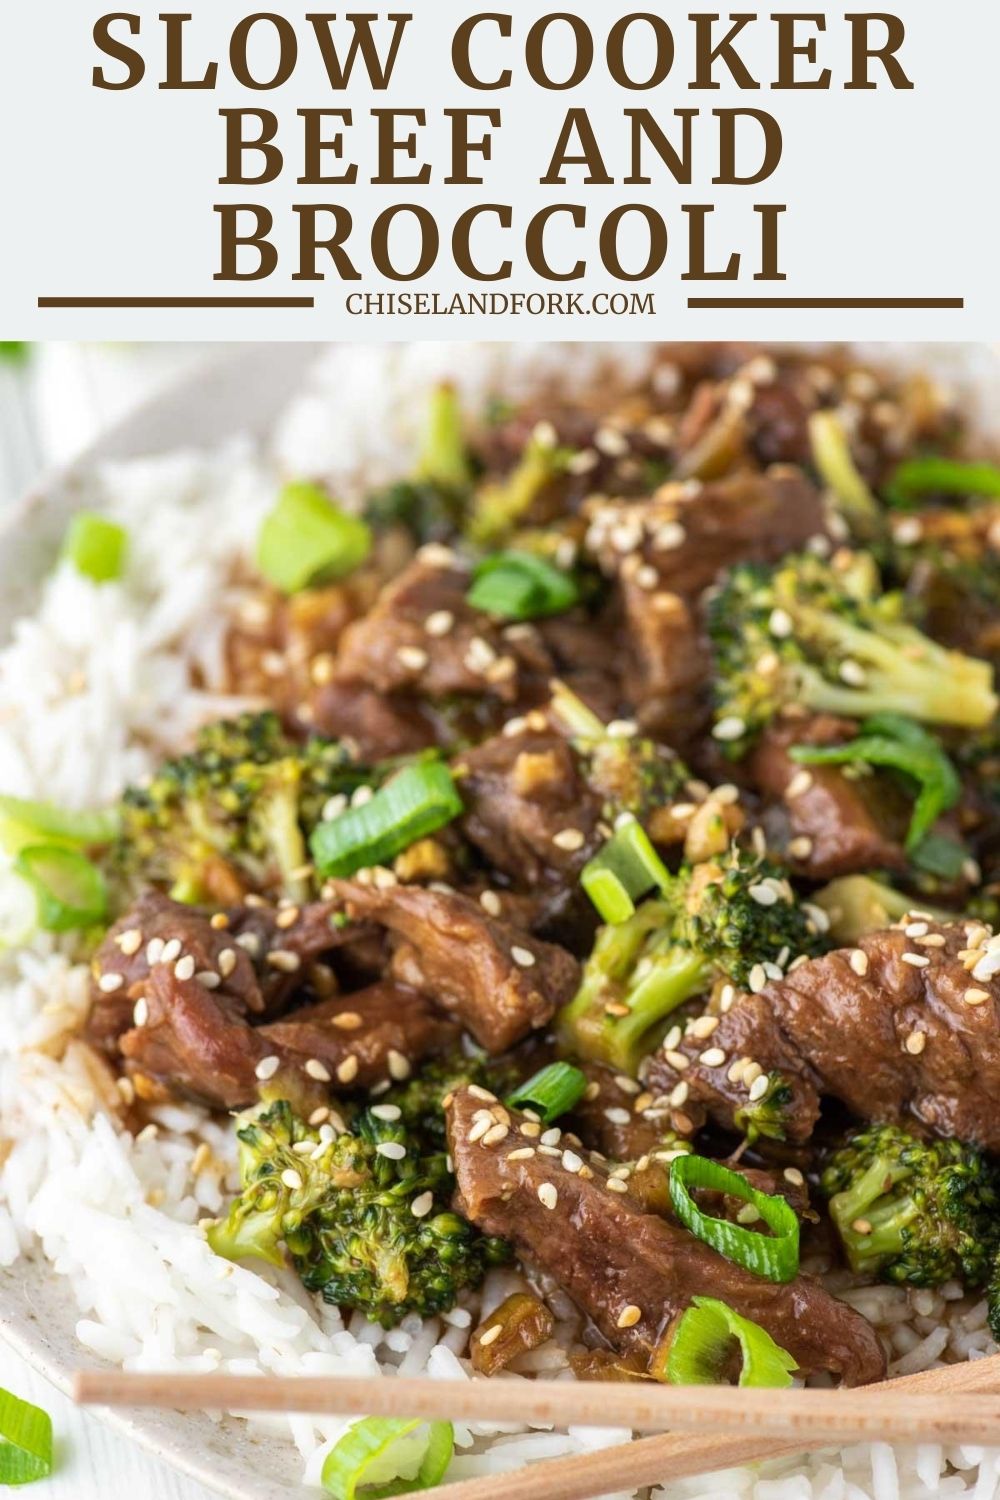 Slow Cooker Beef and Broccoli Recipe - Chisel & Fork